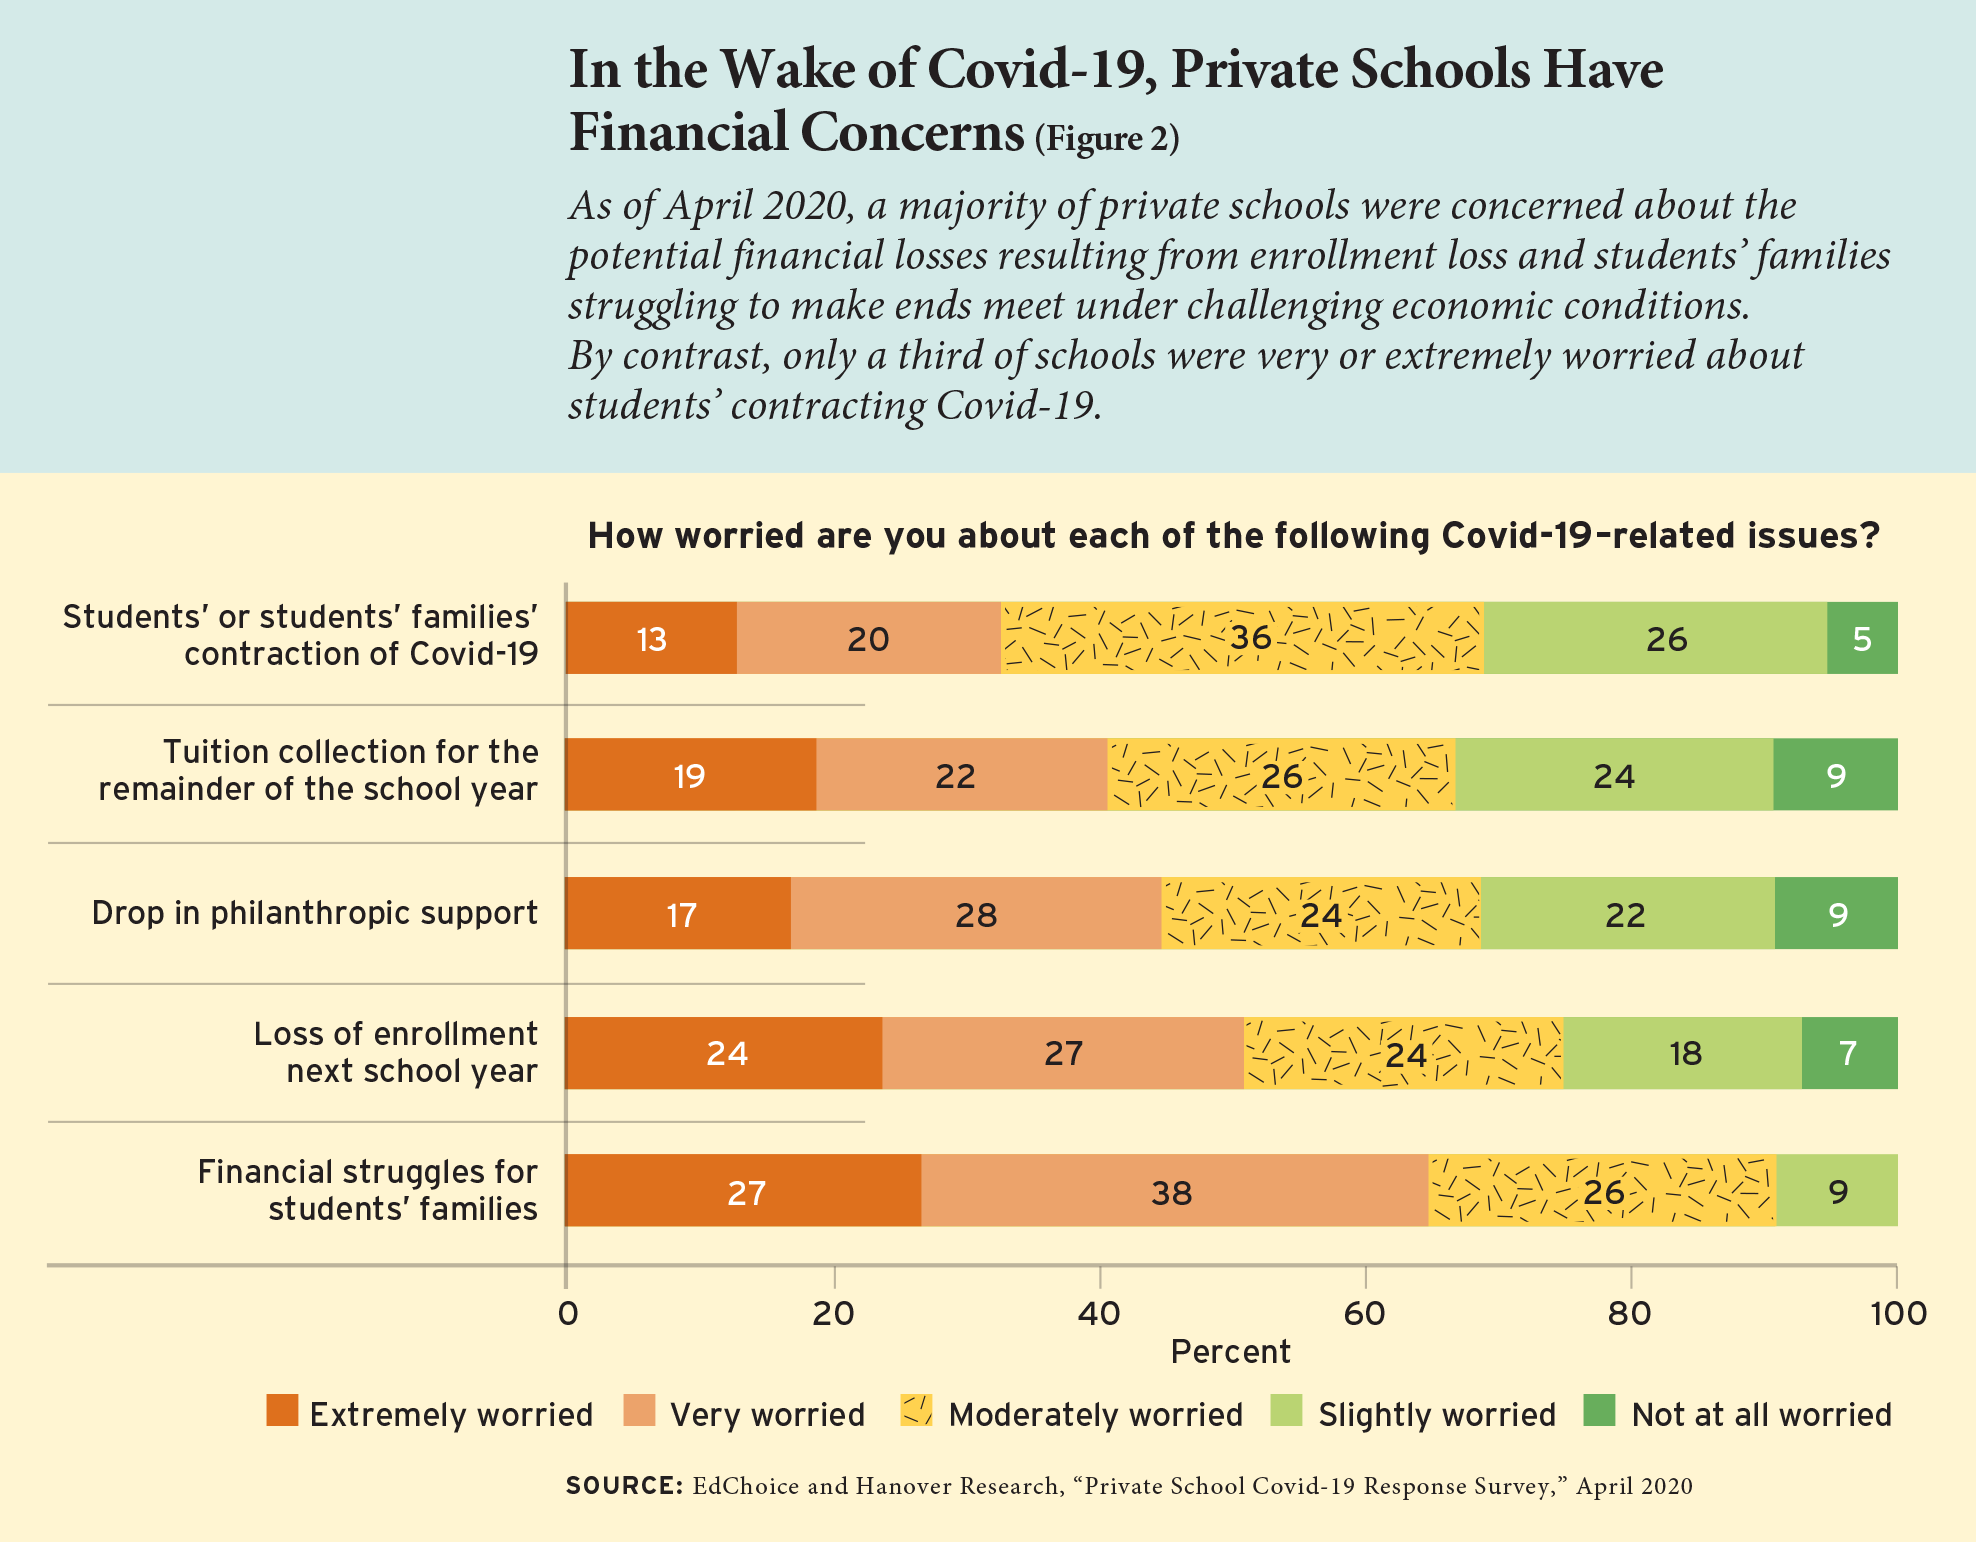 Figure 2: In the Wake of Covid-19, Private Schools Have Financial Concerns 